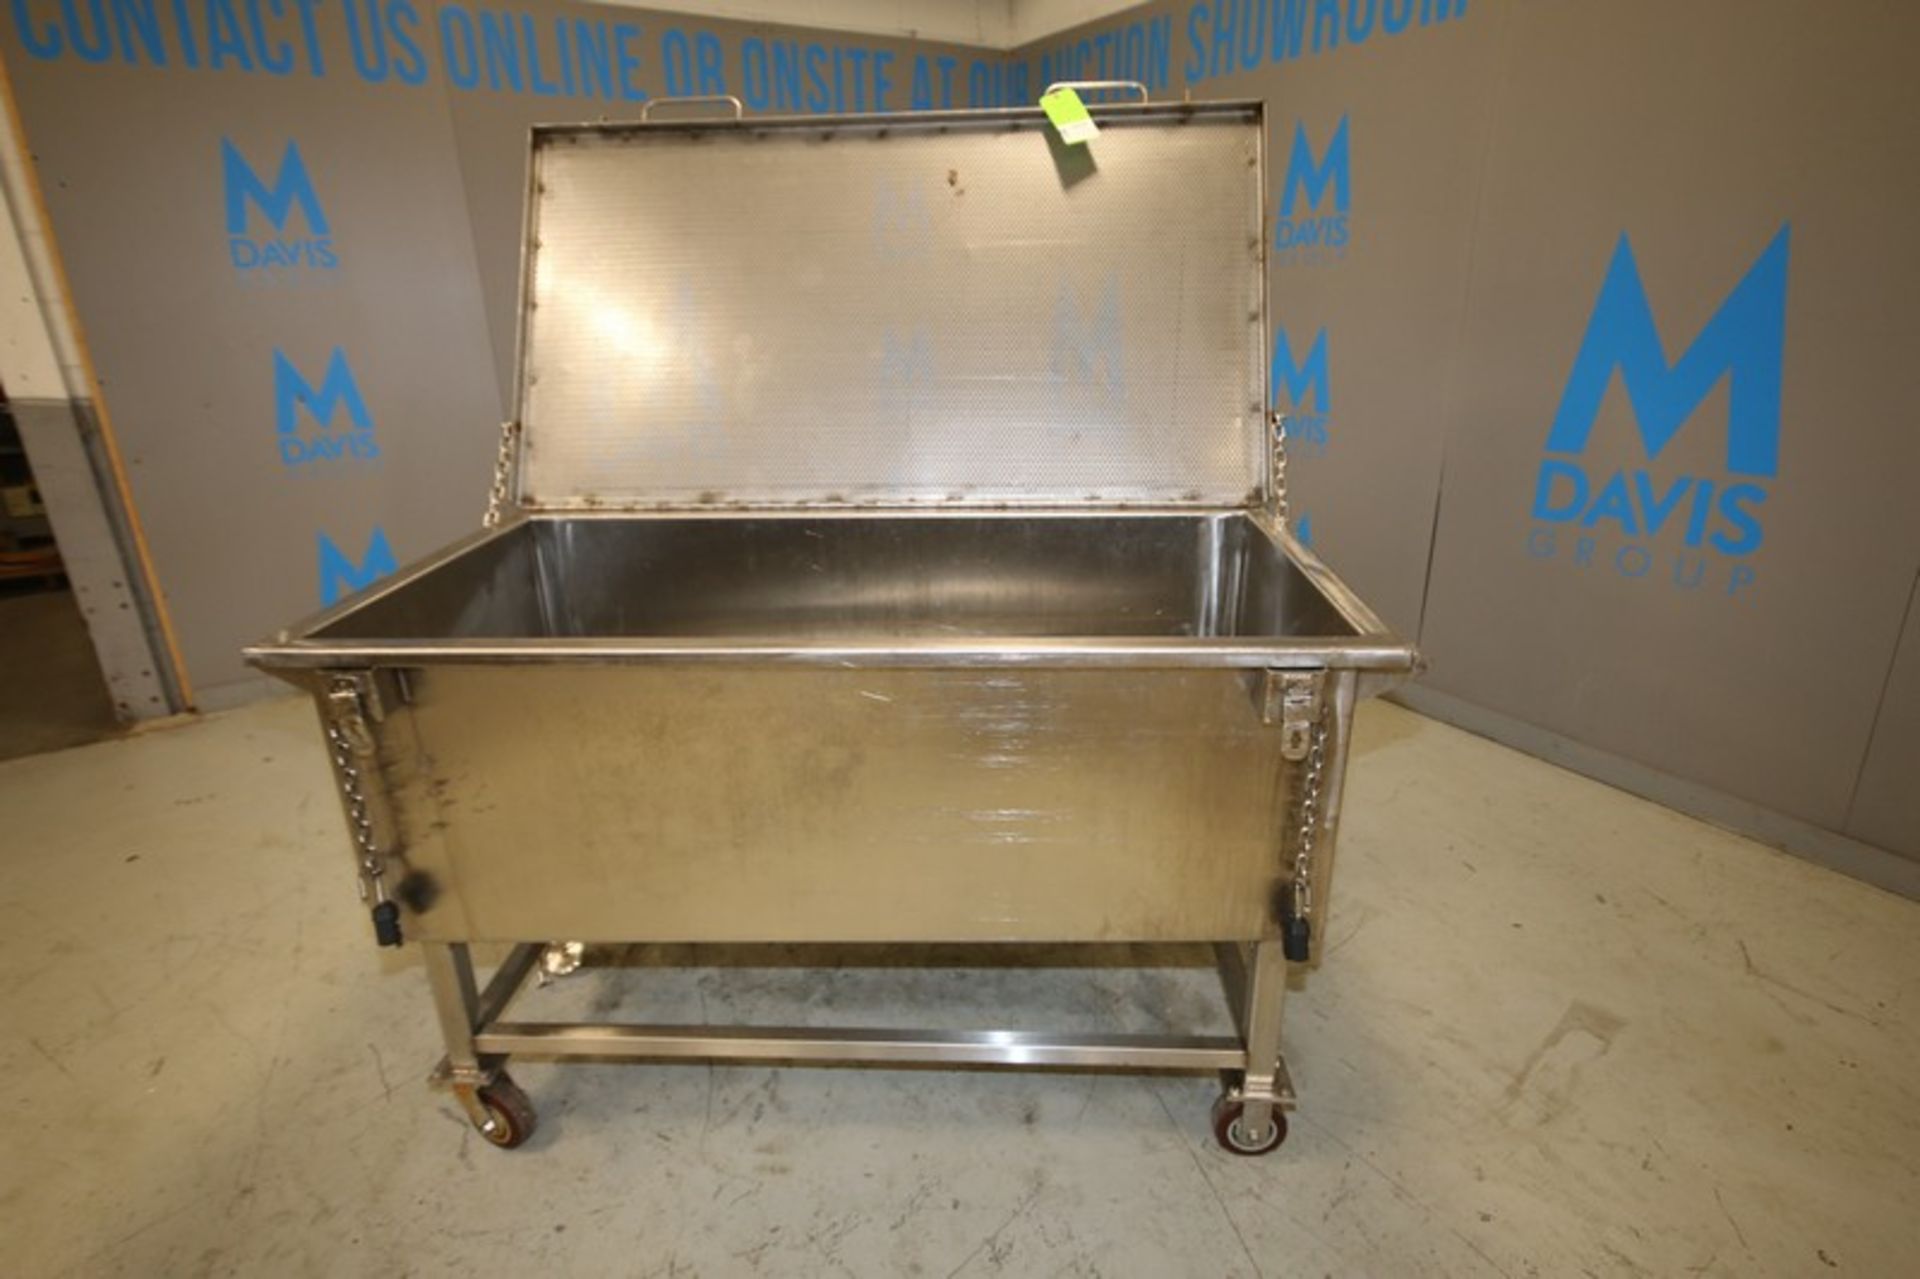 5' L x 30" W x 20" D S/S Portable Tank with Hinged Lid, 3" CT Drain (INV#92814) (Located @ the MDG